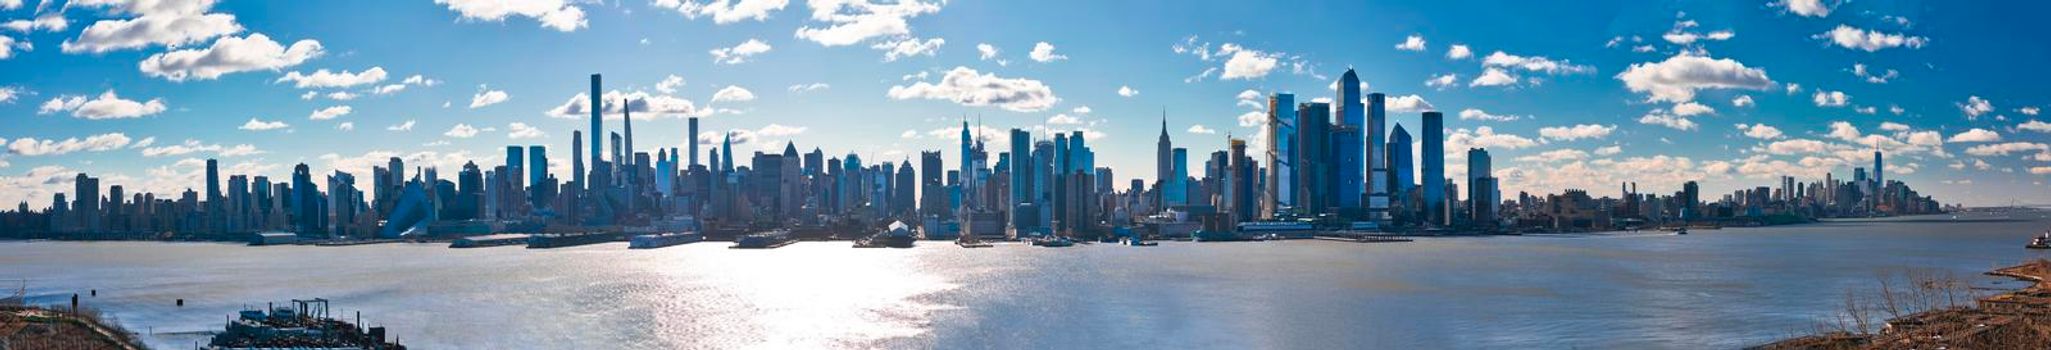 Megapanorama of New York City skyline and Hudson river view